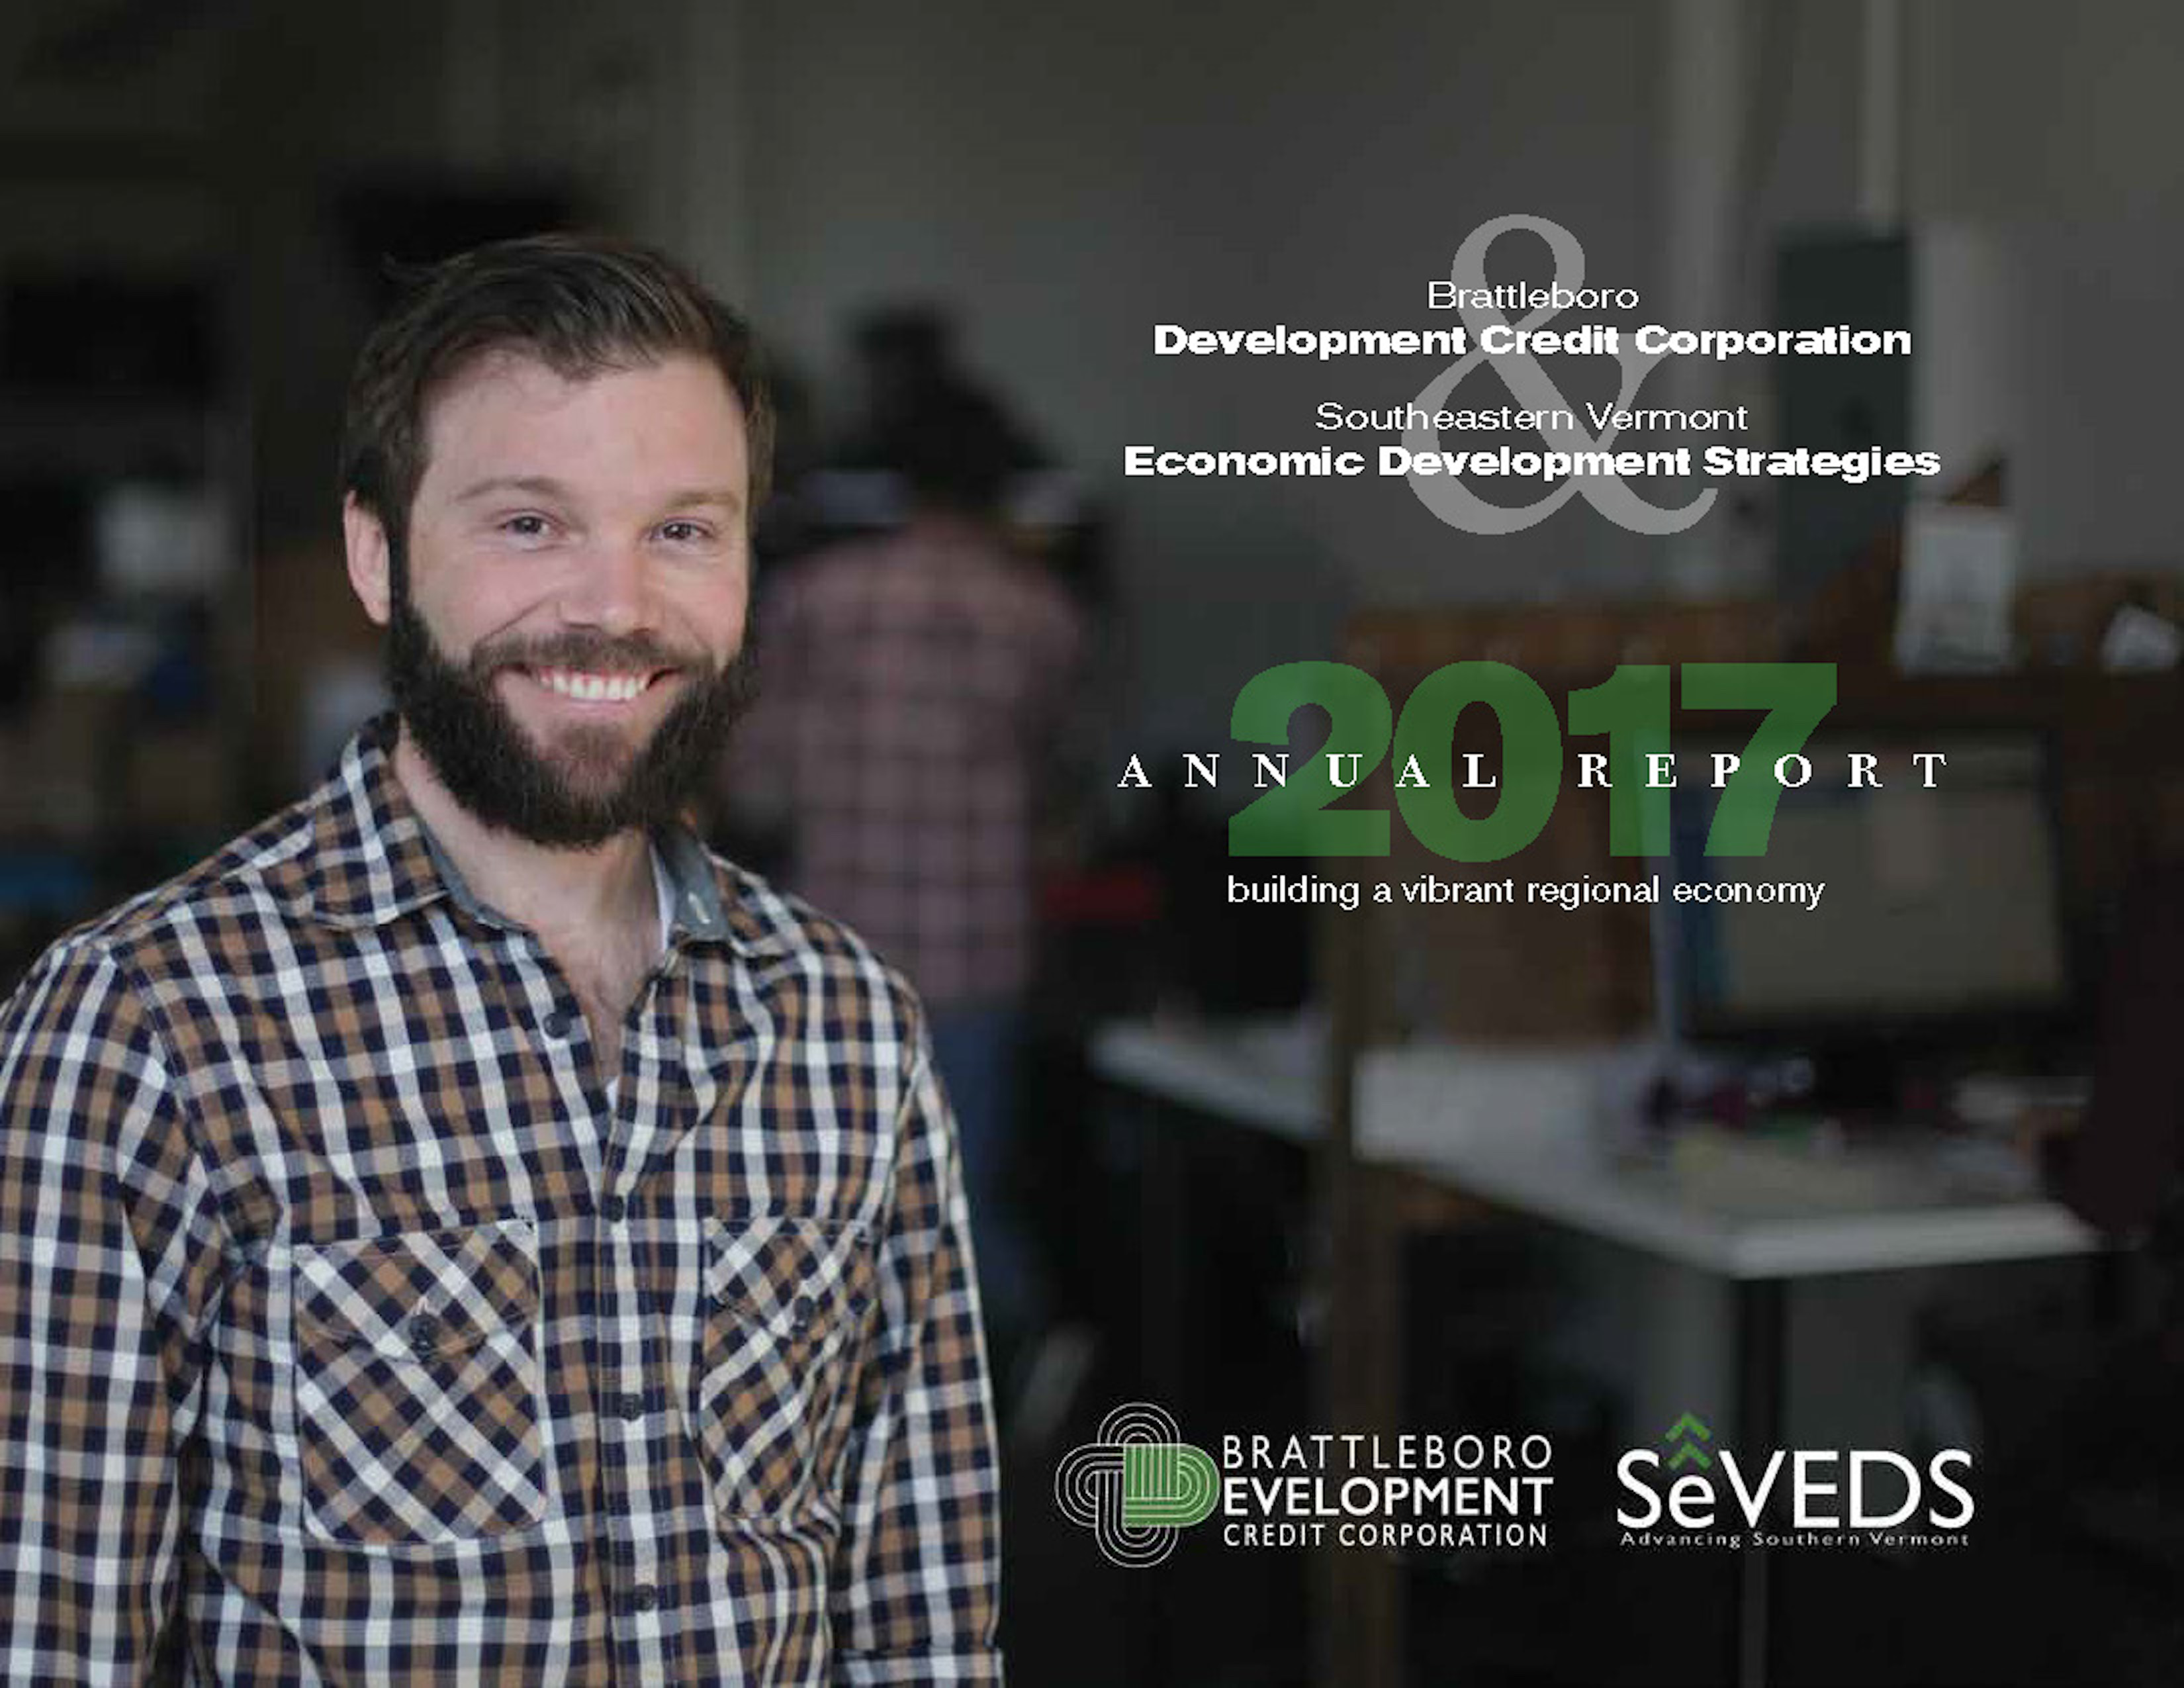 The Cover Of The BDCC & SeVEDS 2017 Annual Report Features Luke Stafford,
SeVEDS Board Member, And CEO Of Mondo Mediaworks, A BDCC Cotton Mill Tenant